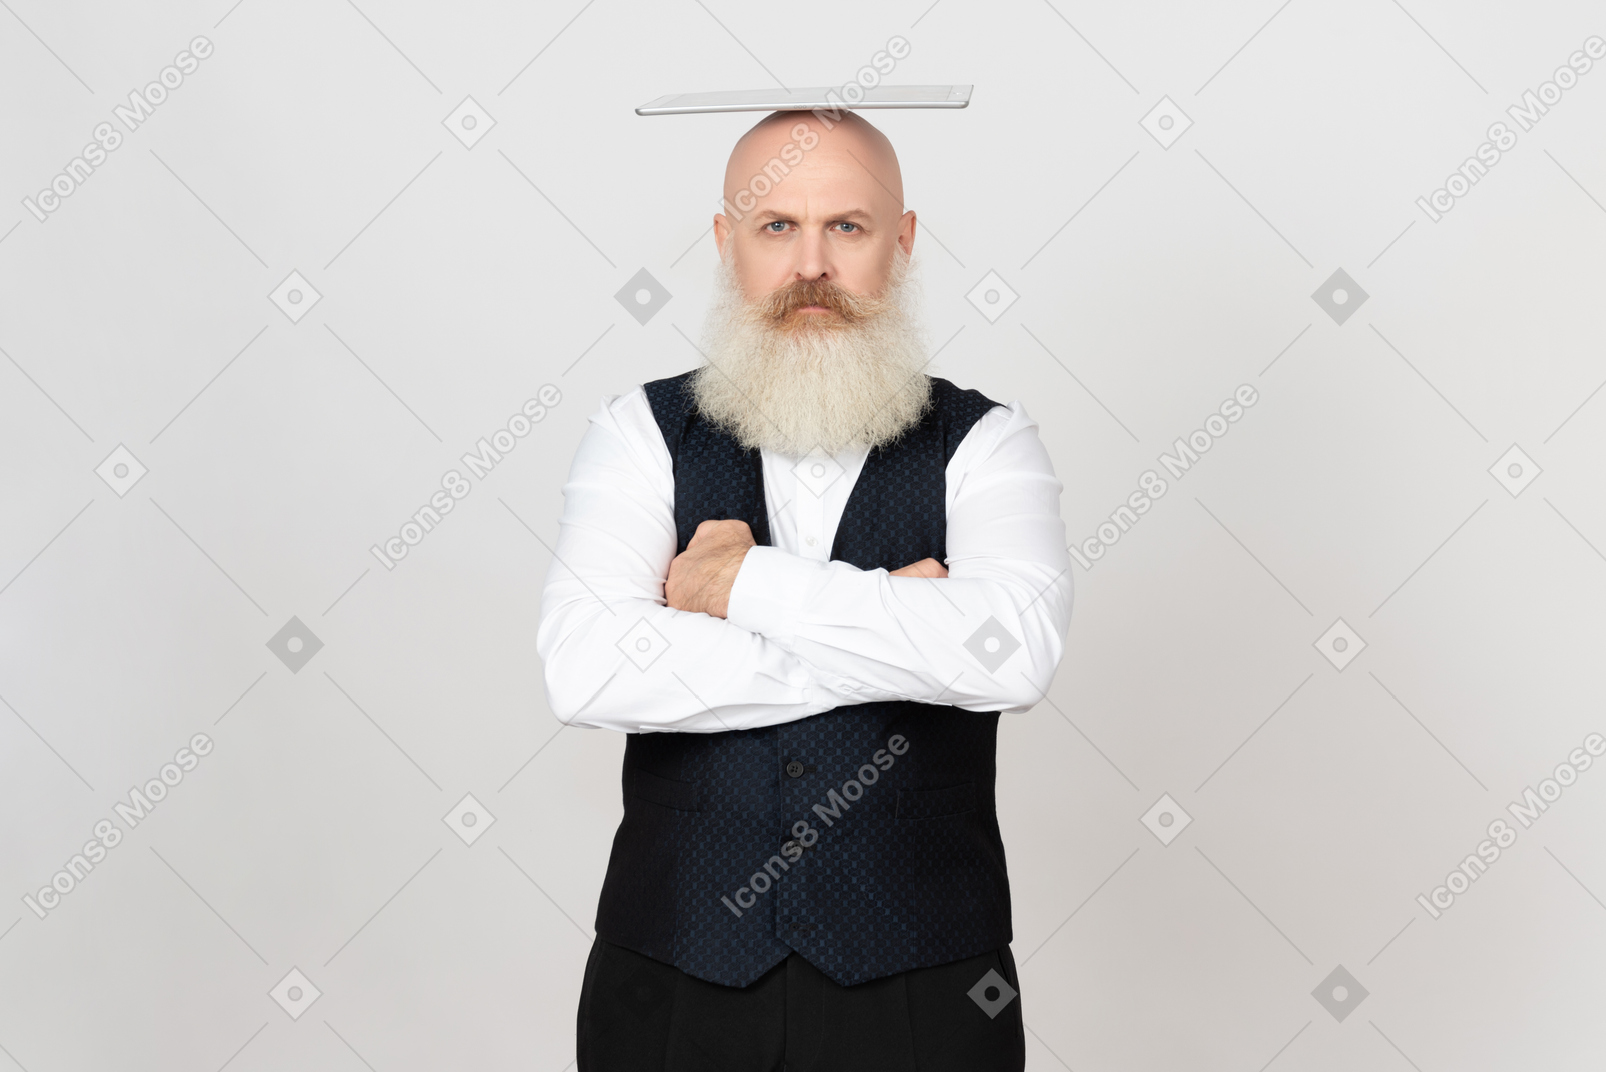 Aged man with his hands crossed holding digital tablet on head